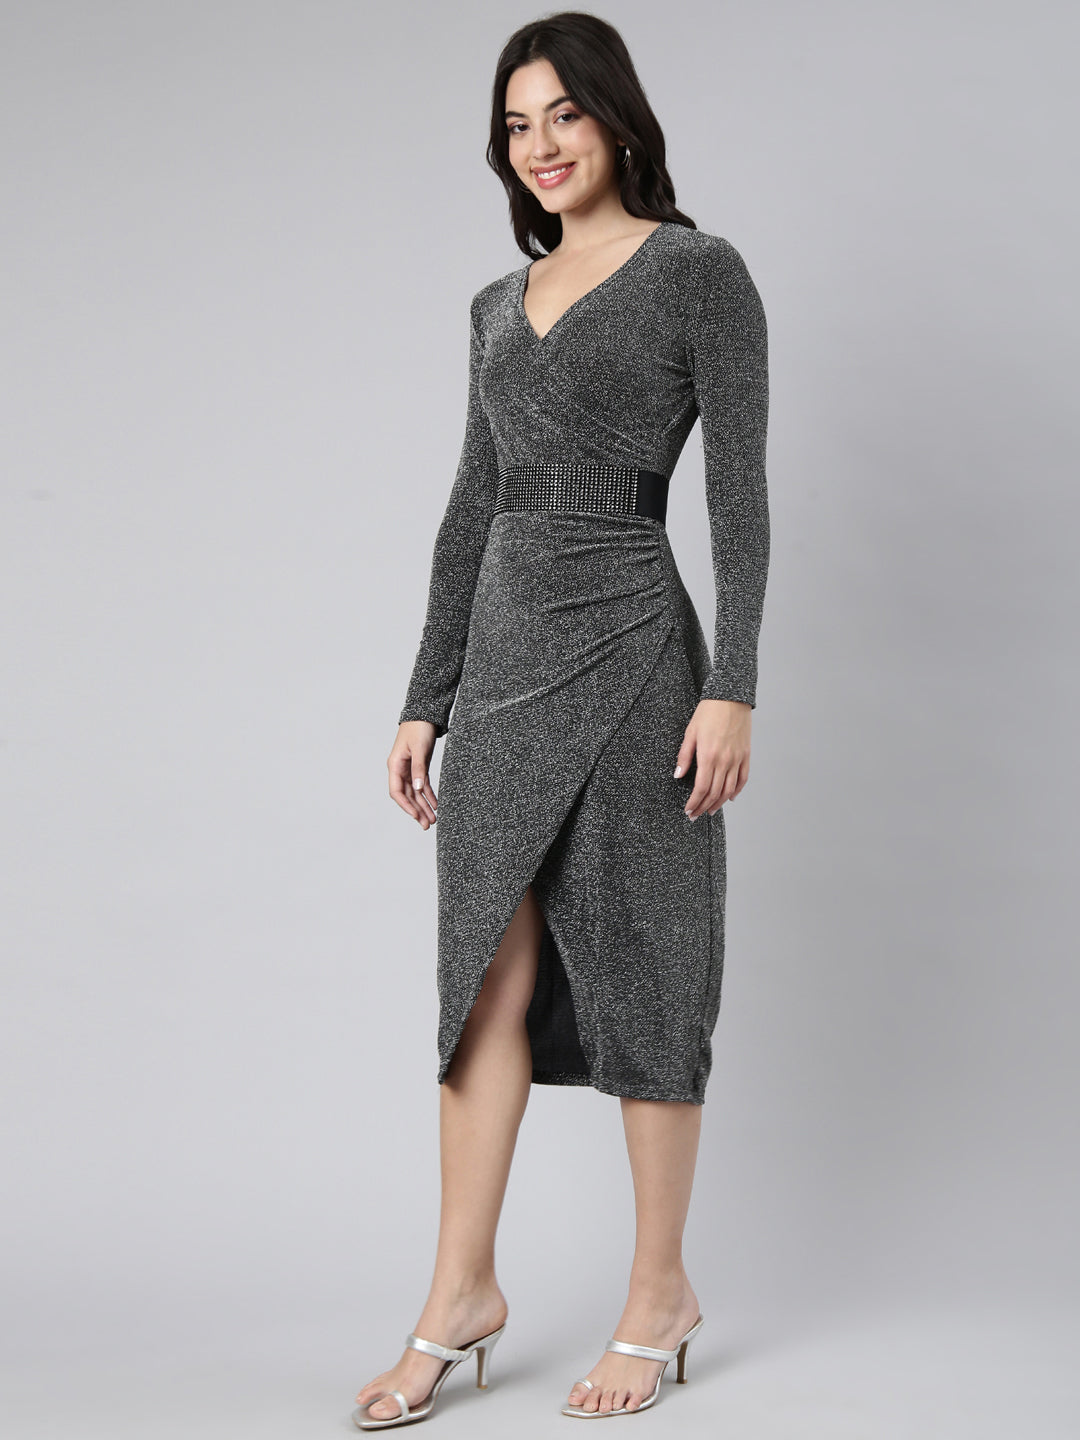 Women Solid Grey Sheath Dress comes with Belt